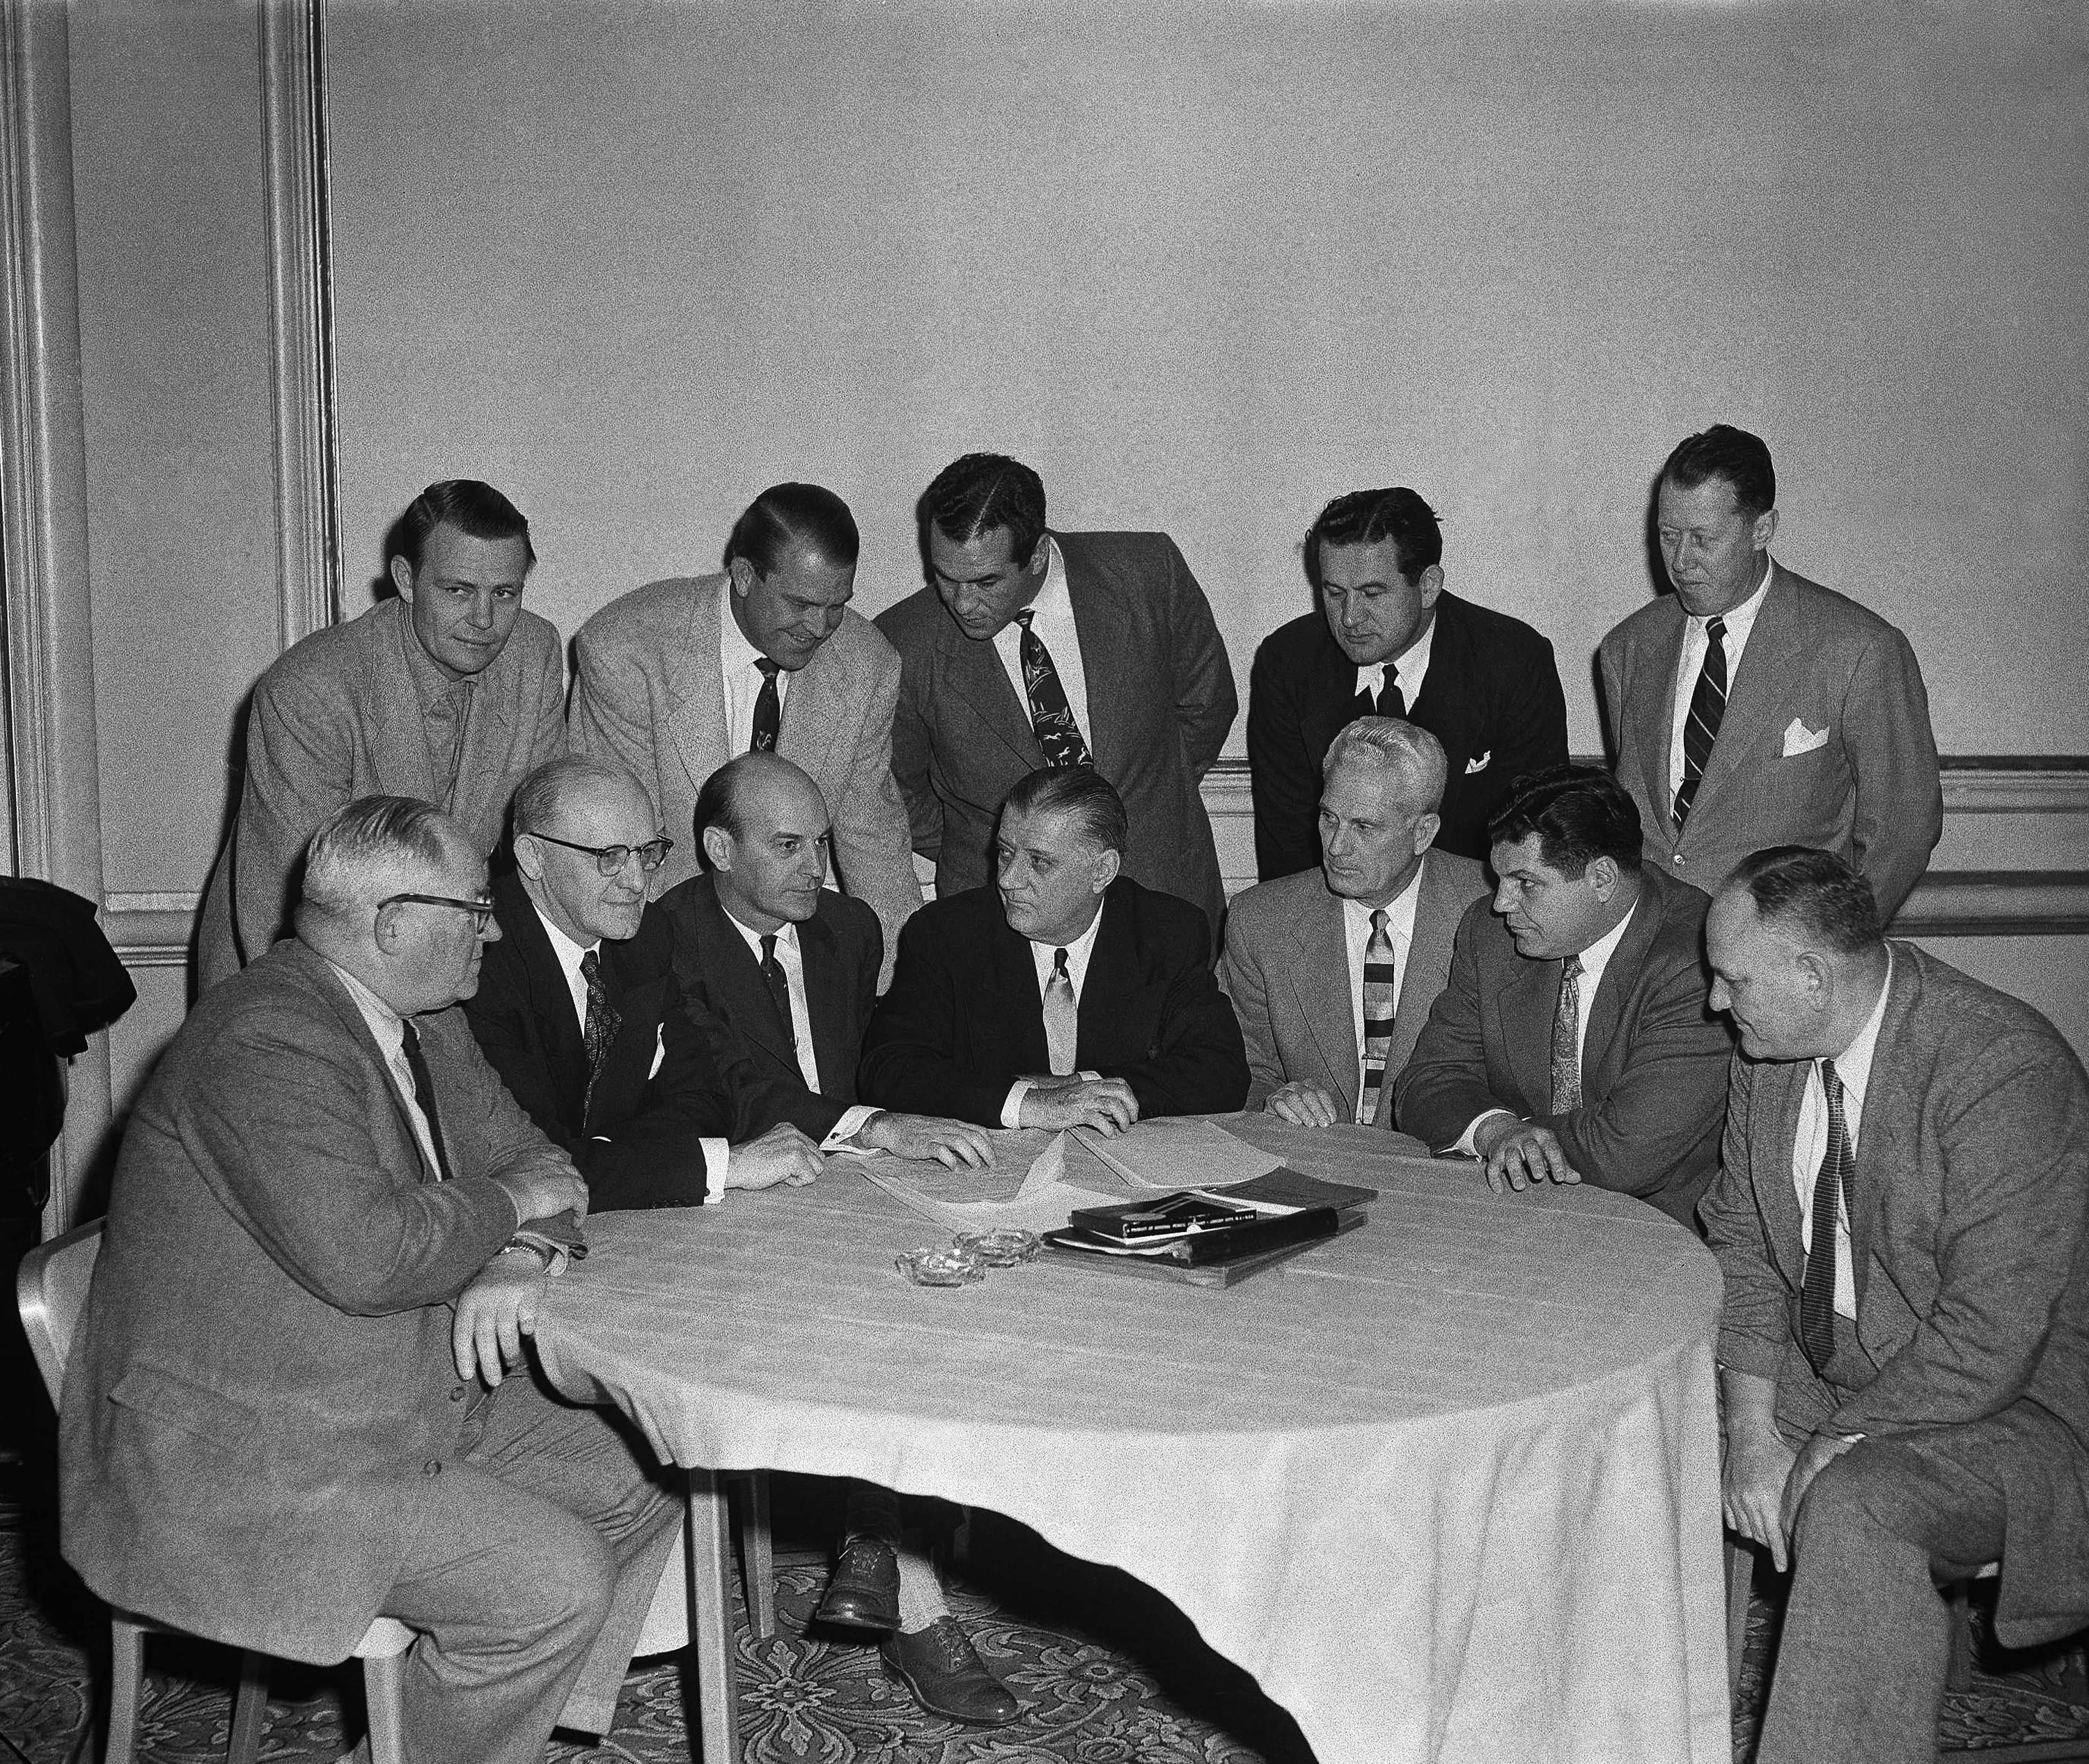 NFL commissioner Bert Bell, seated at the middle, speaks with owners and representatives from teams during a league meeting in Philadelphia in January 1953.